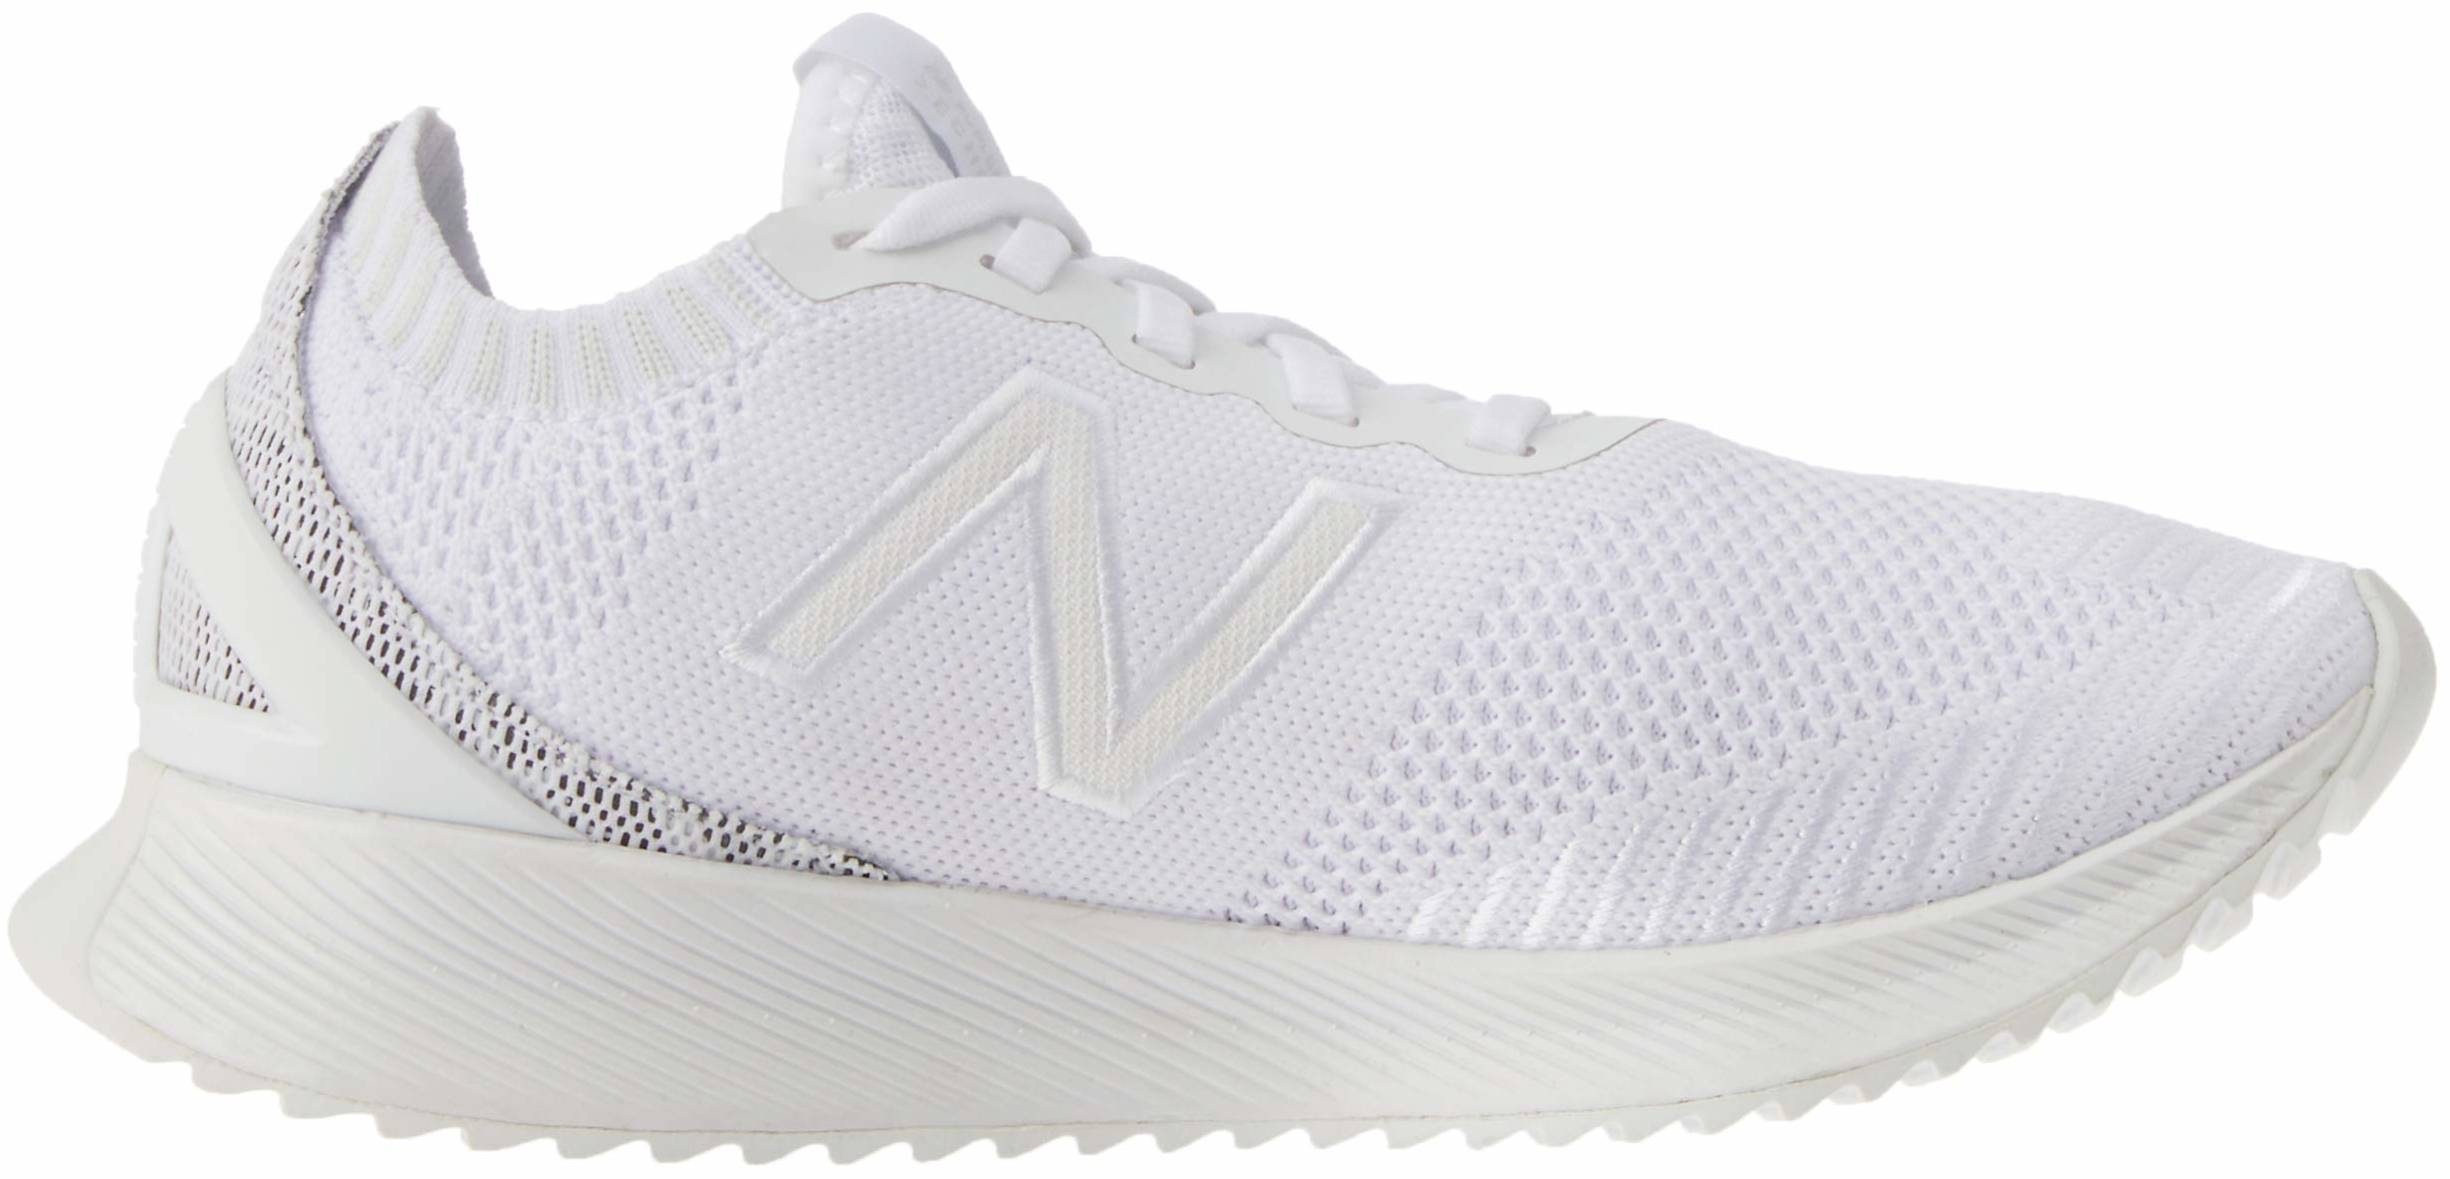 New Balance FuelCell Echo - Review 2021 - Facts, Deals ($56 ...